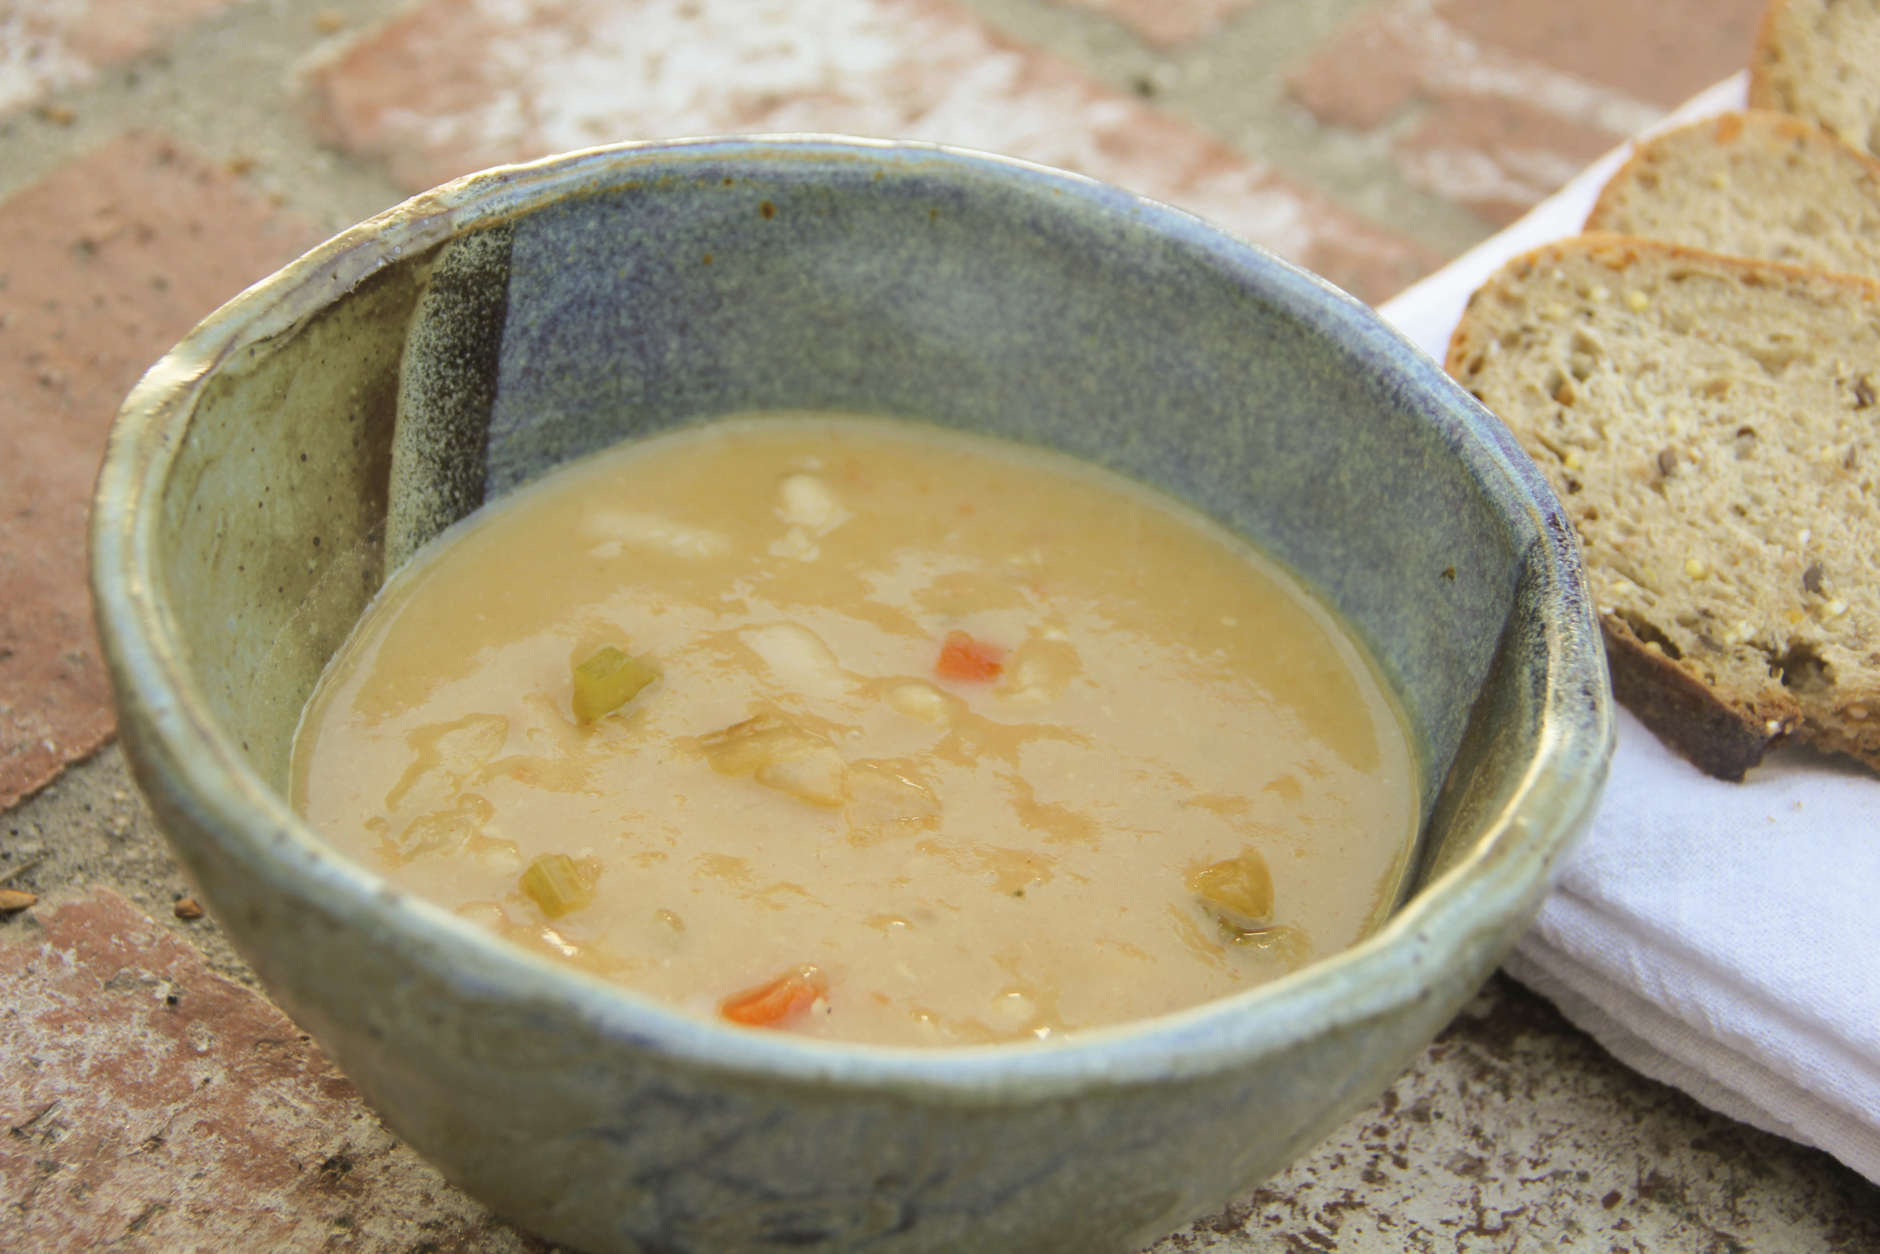 This March 26, 2017 photo shows white bean and garlic soup in Coronado, Calif. This dish is from a recipe by Melissa d'Arabian. (Melissa d'Arabian via AP)